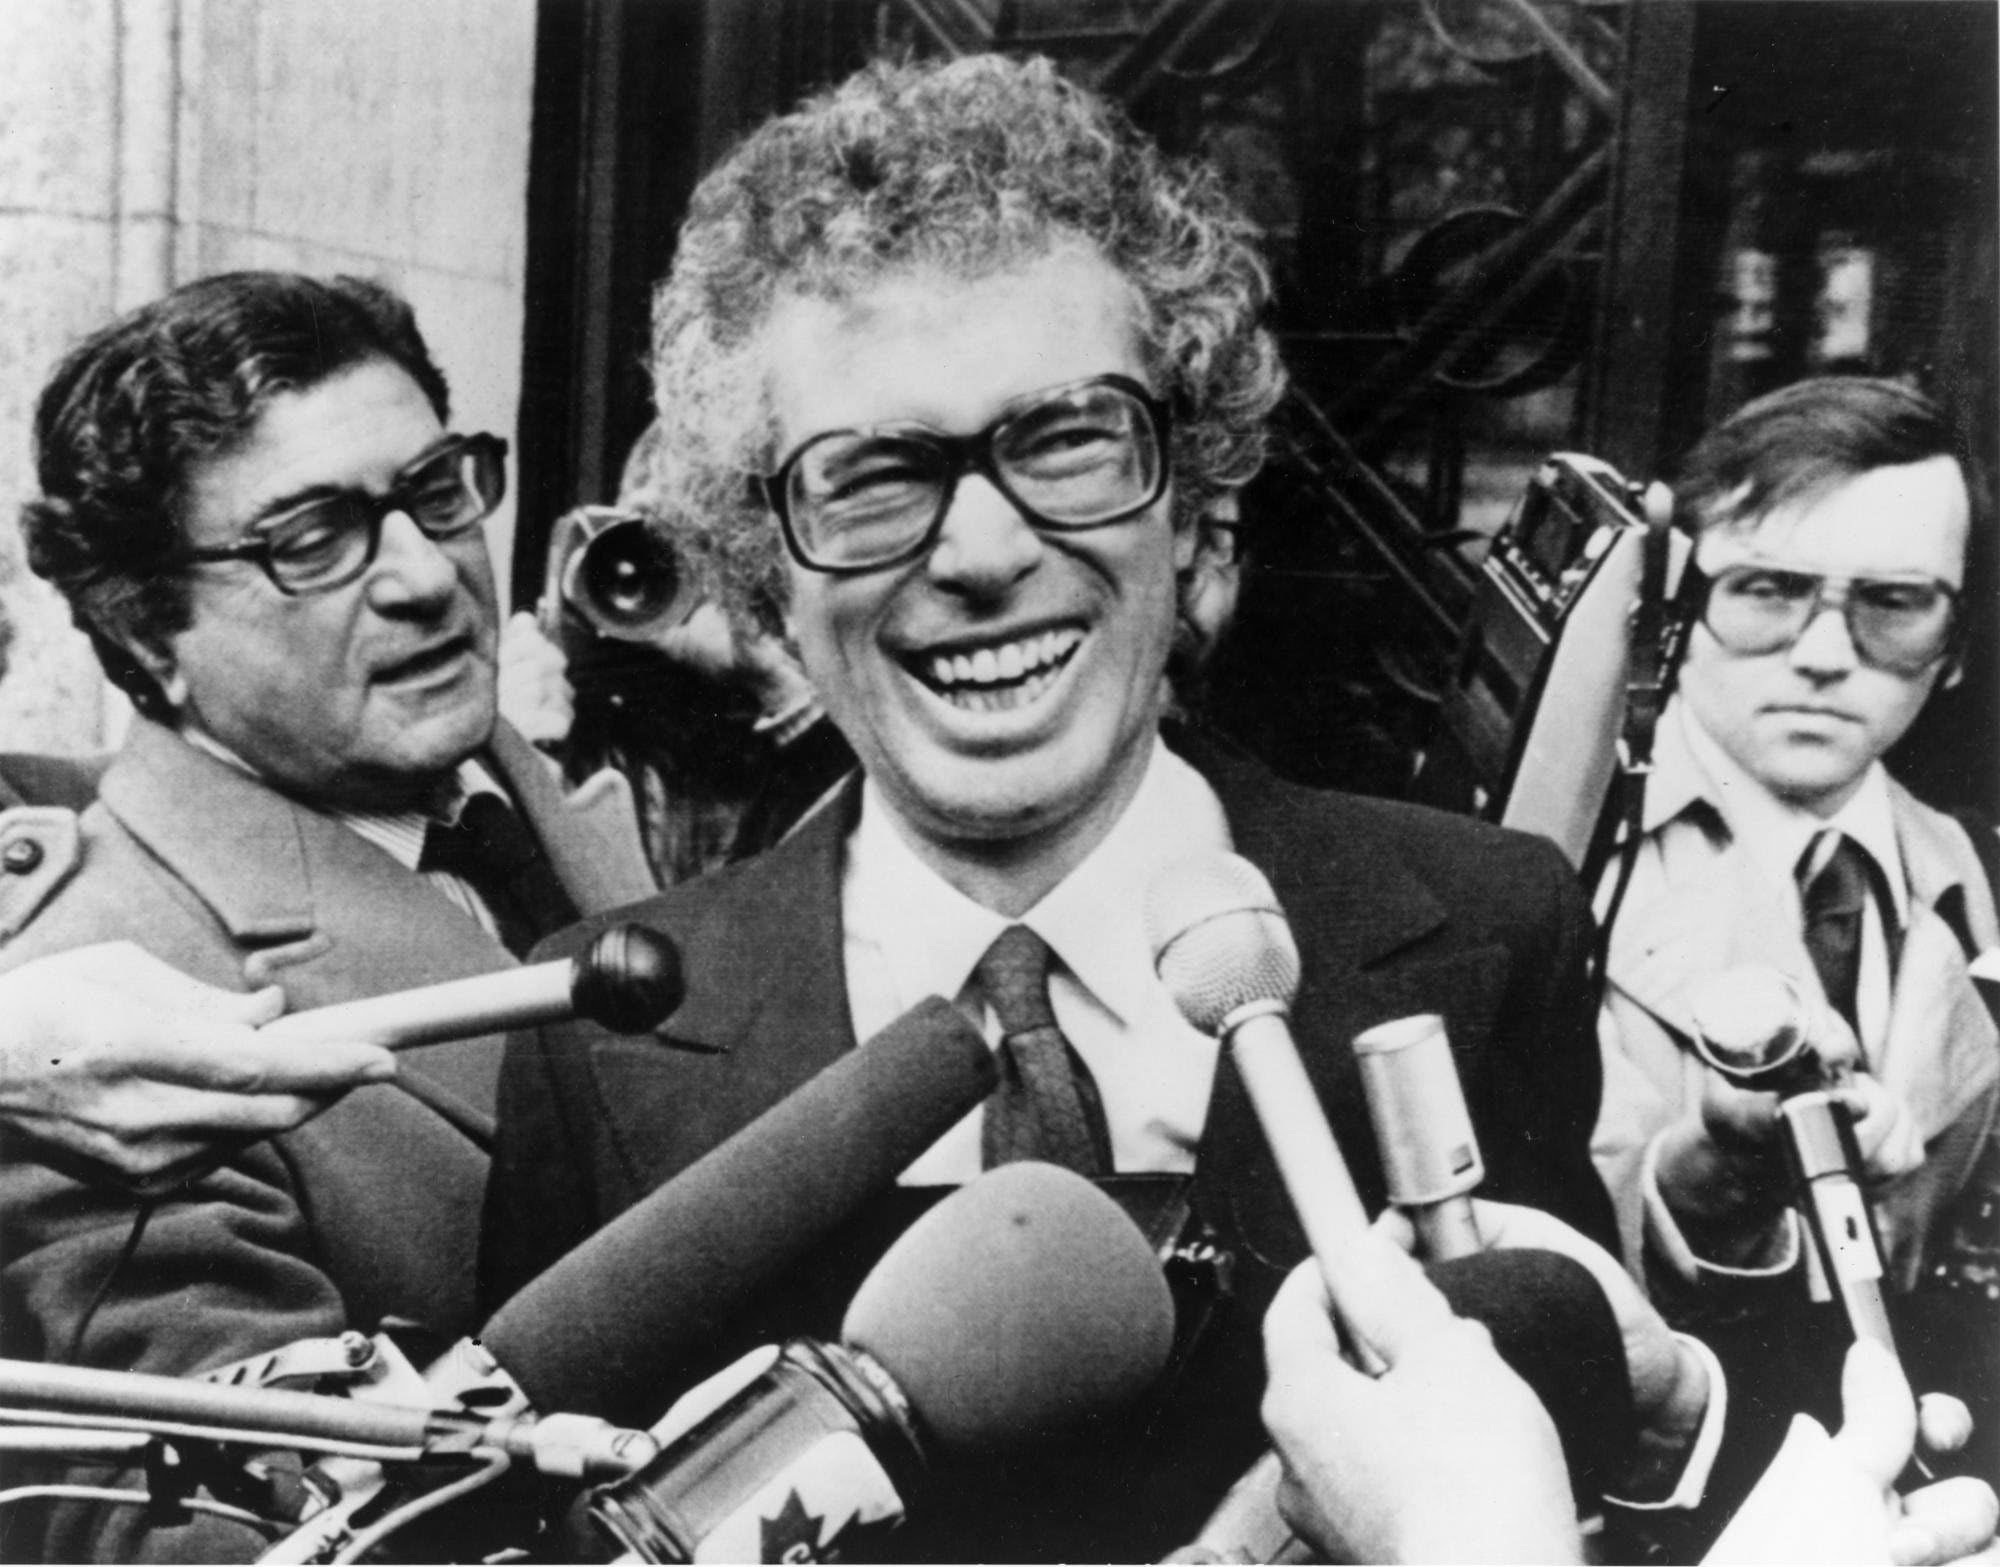 FILE - In this Jan. 31, 1980, file photo, Ken Taylor, Canadian Ambassador to Iran, laughs as he answers questions during a meeting with journalists outside the Canadian Embassy in Paris. Taylor, who kept Americans hidden at his residence during the 1979 Iran hostage crisis, died Thursday, Oct. 15, 2015, after a two month battle with colon cancer, his wife Pat said. He was 81. (AP Photo/File)